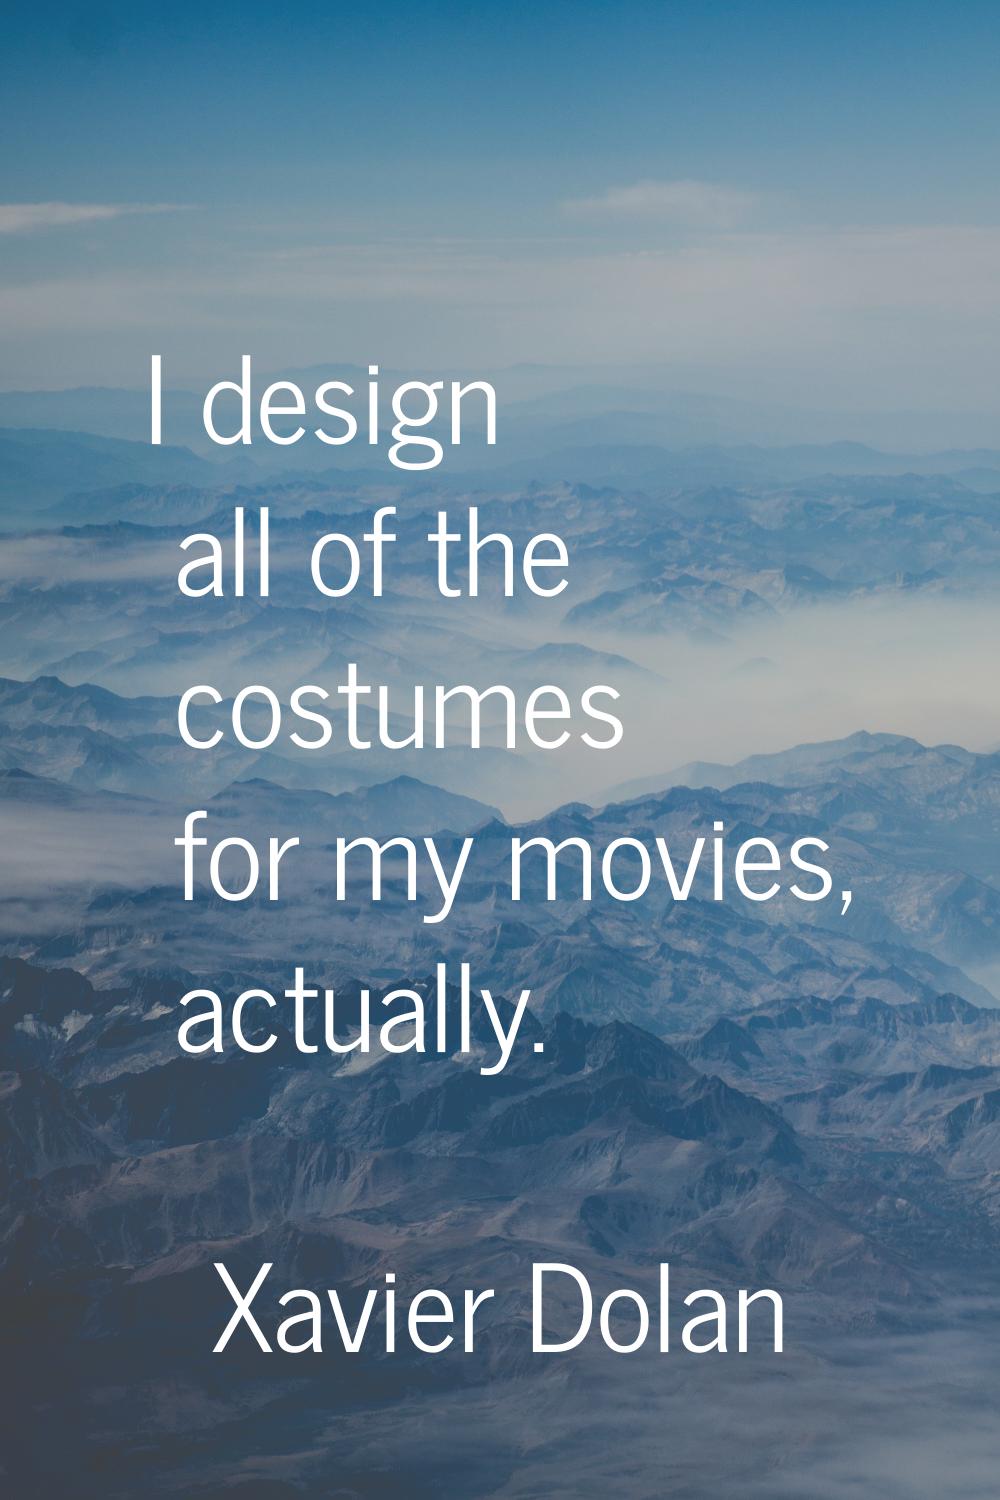 I design all of the costumes for my movies, actually.